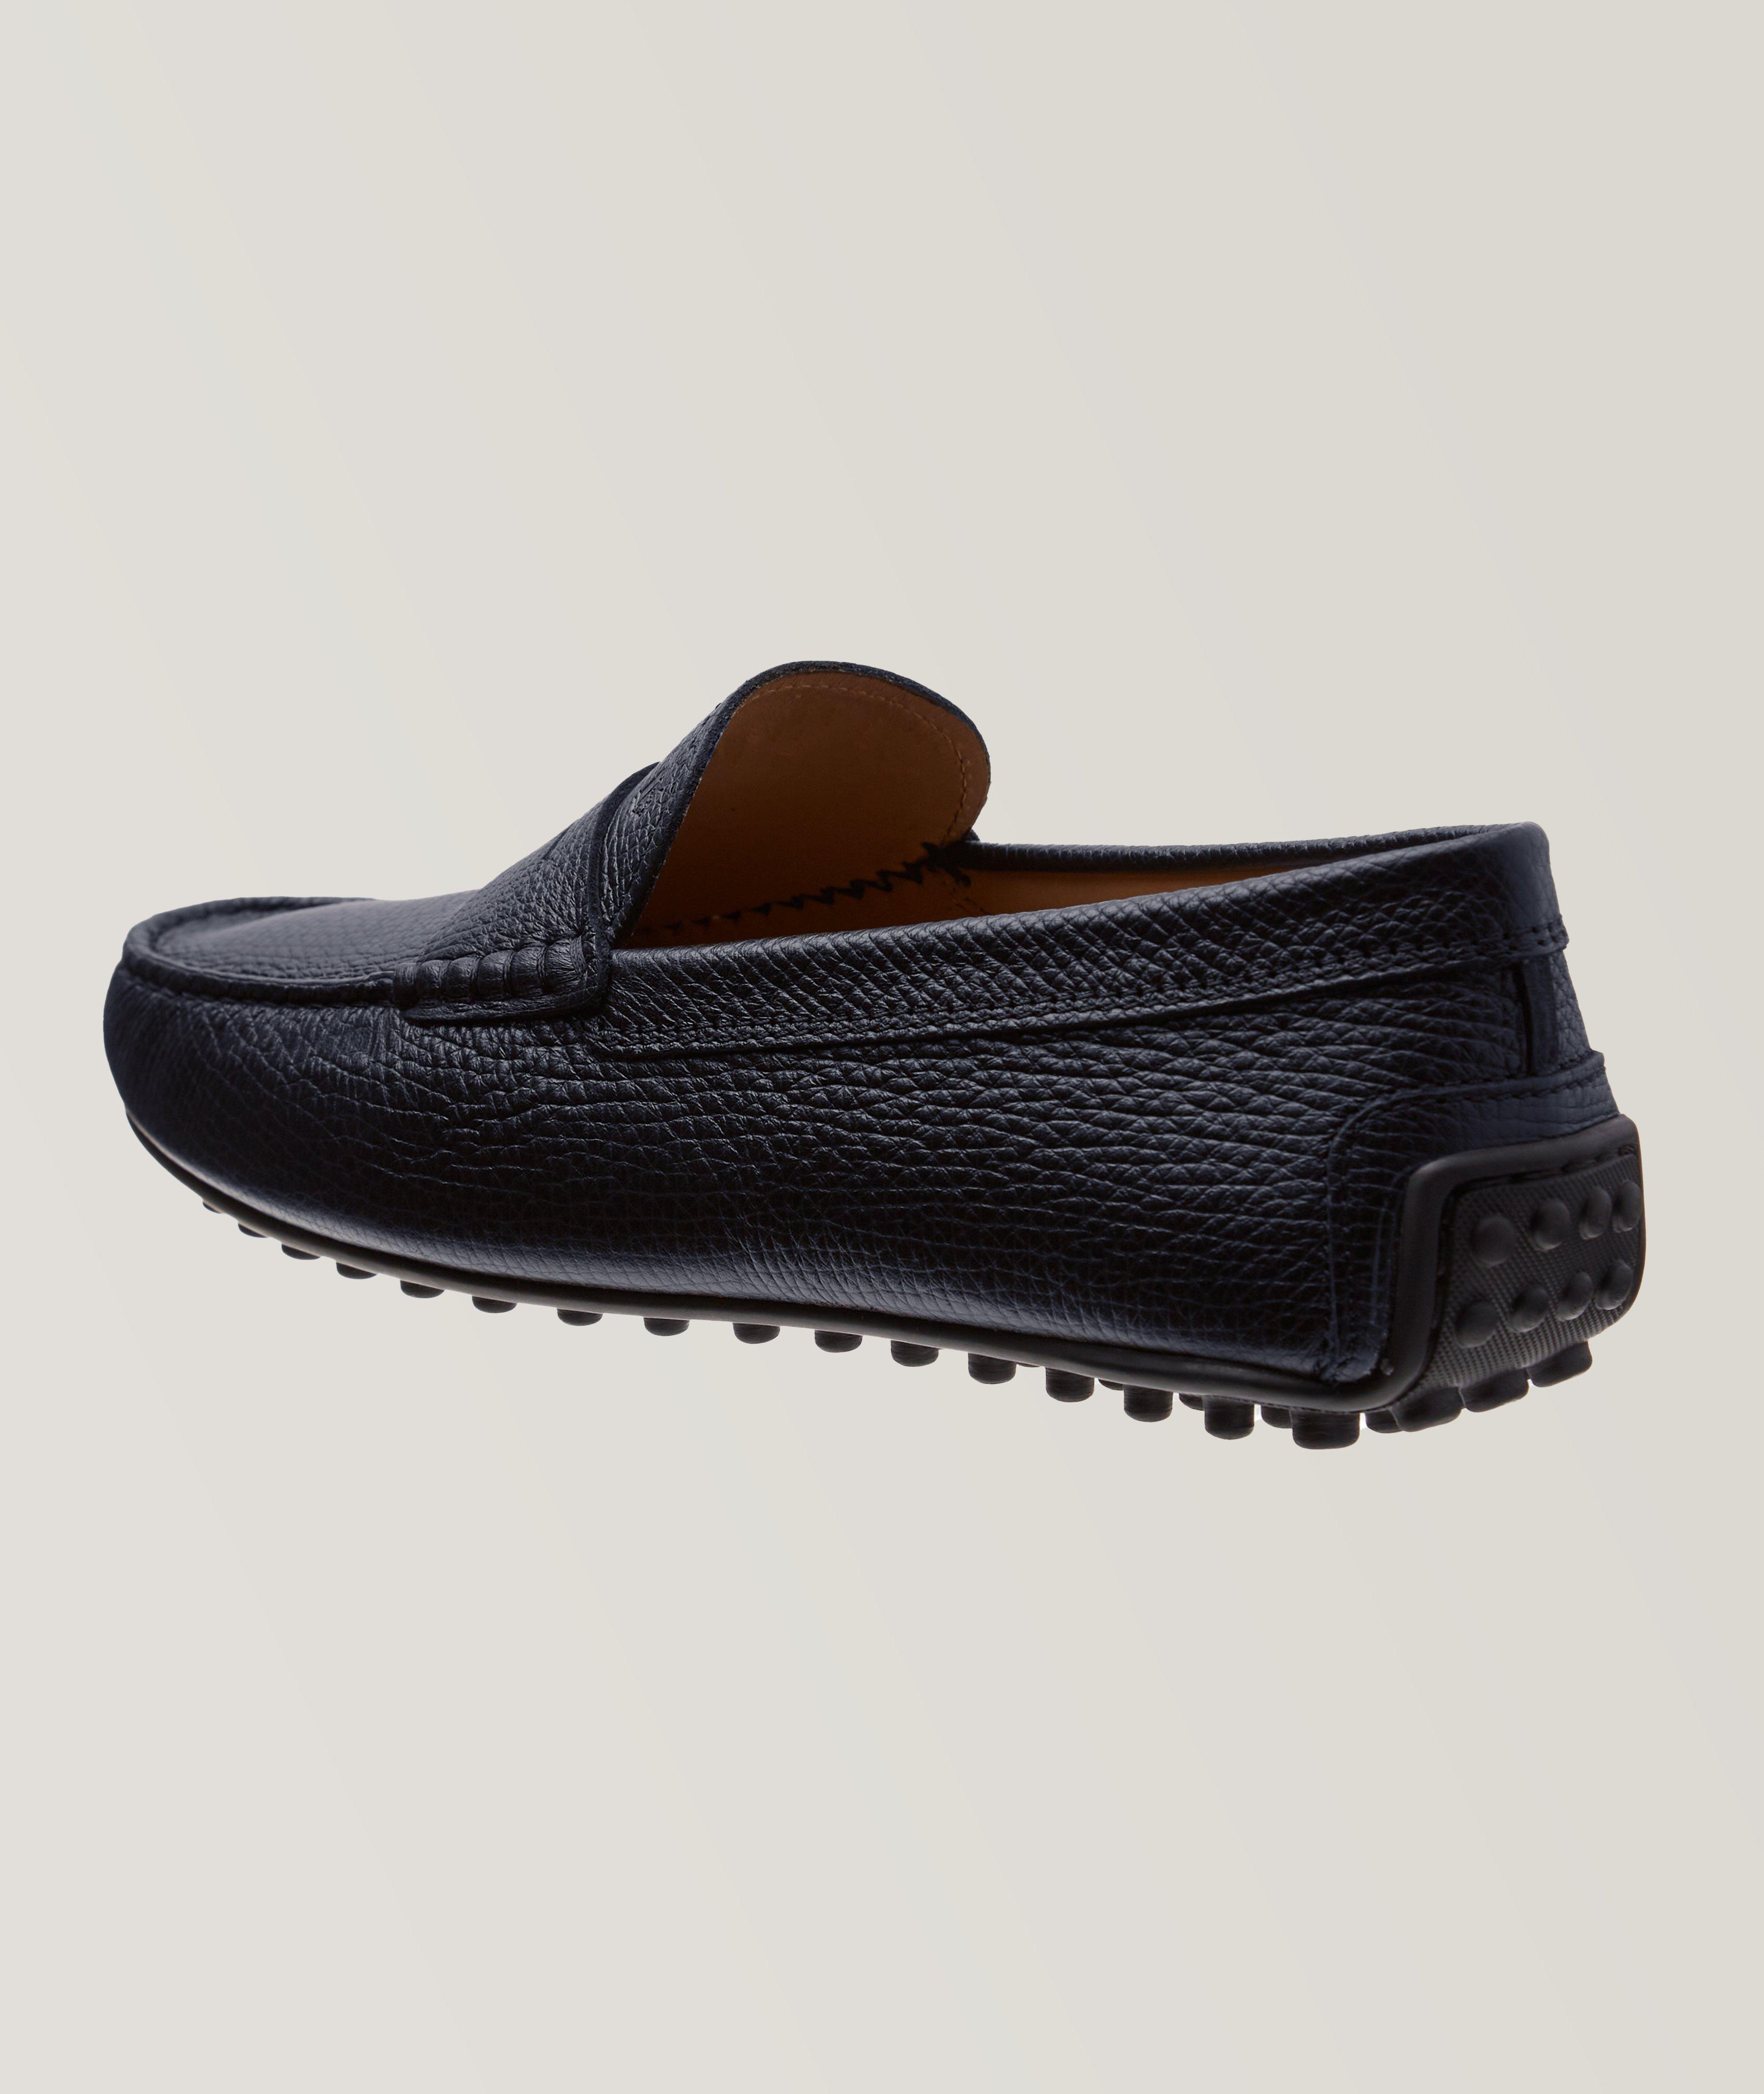 City Gommino Leather Loafers image 1